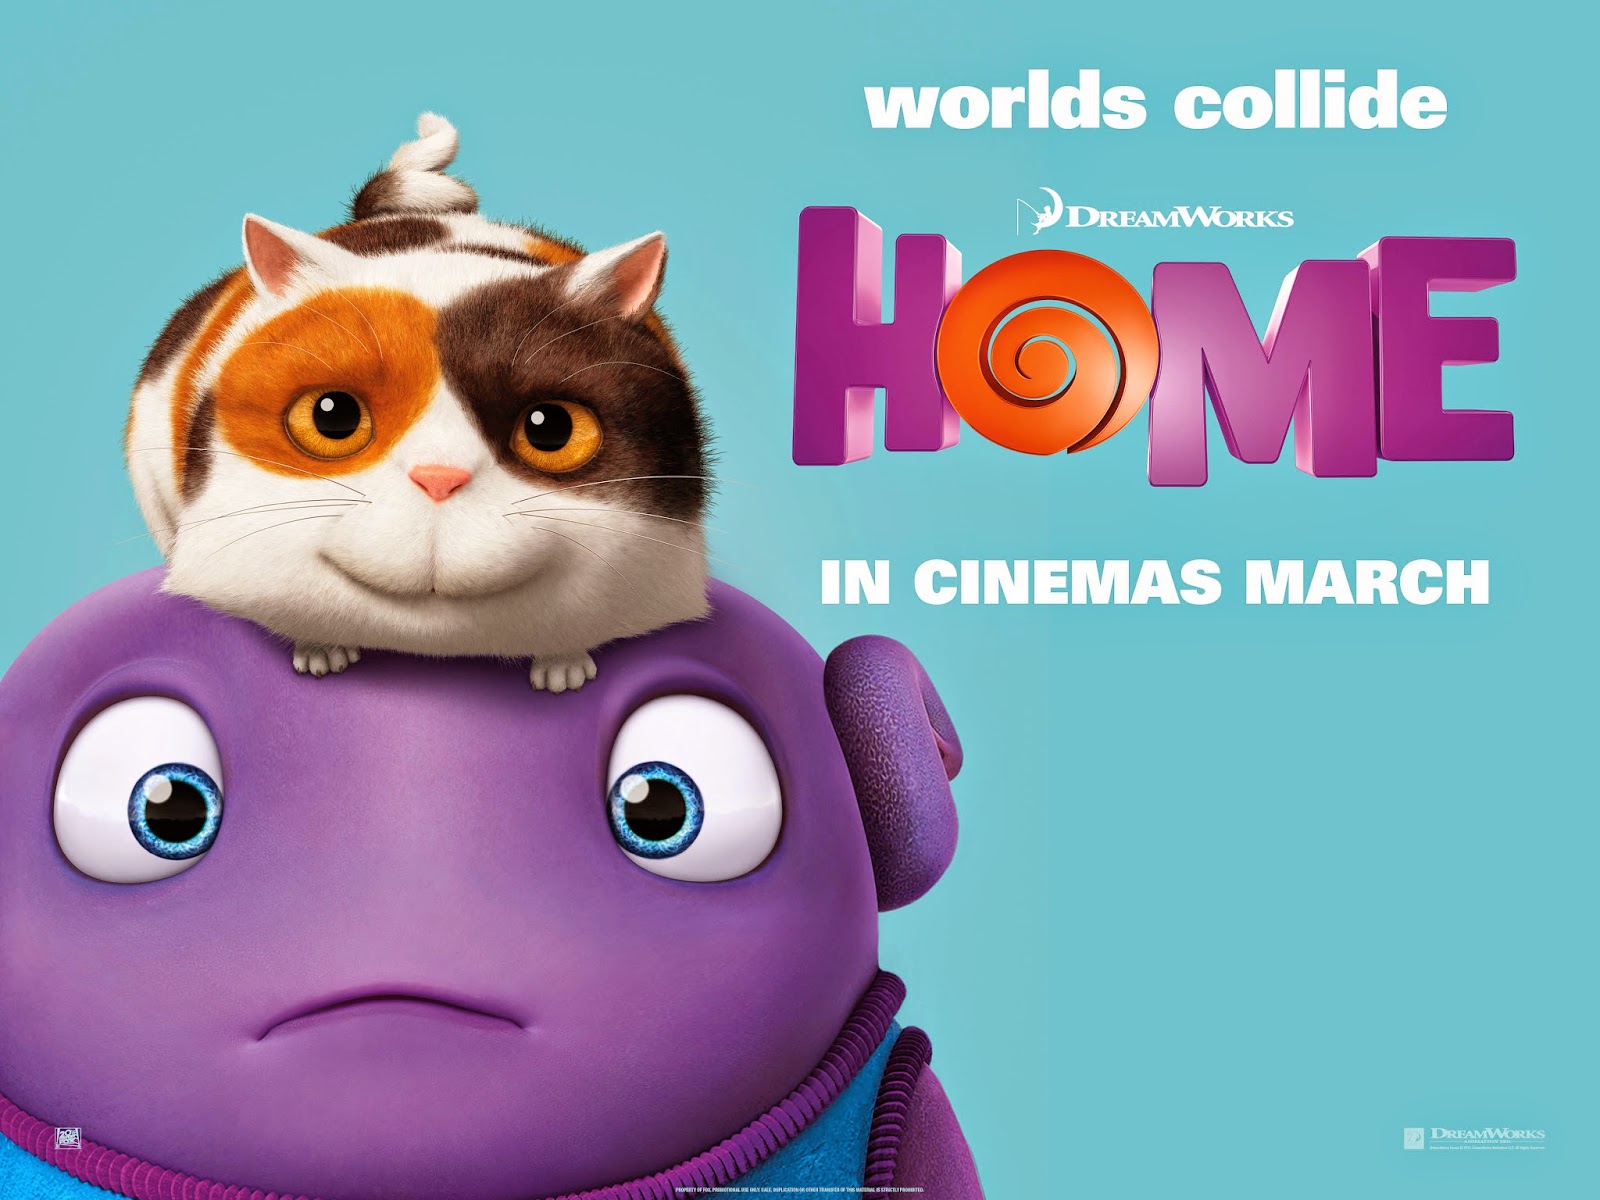  Home  A Brand New Animation From DreamWorks  Animation Two Video Clips 